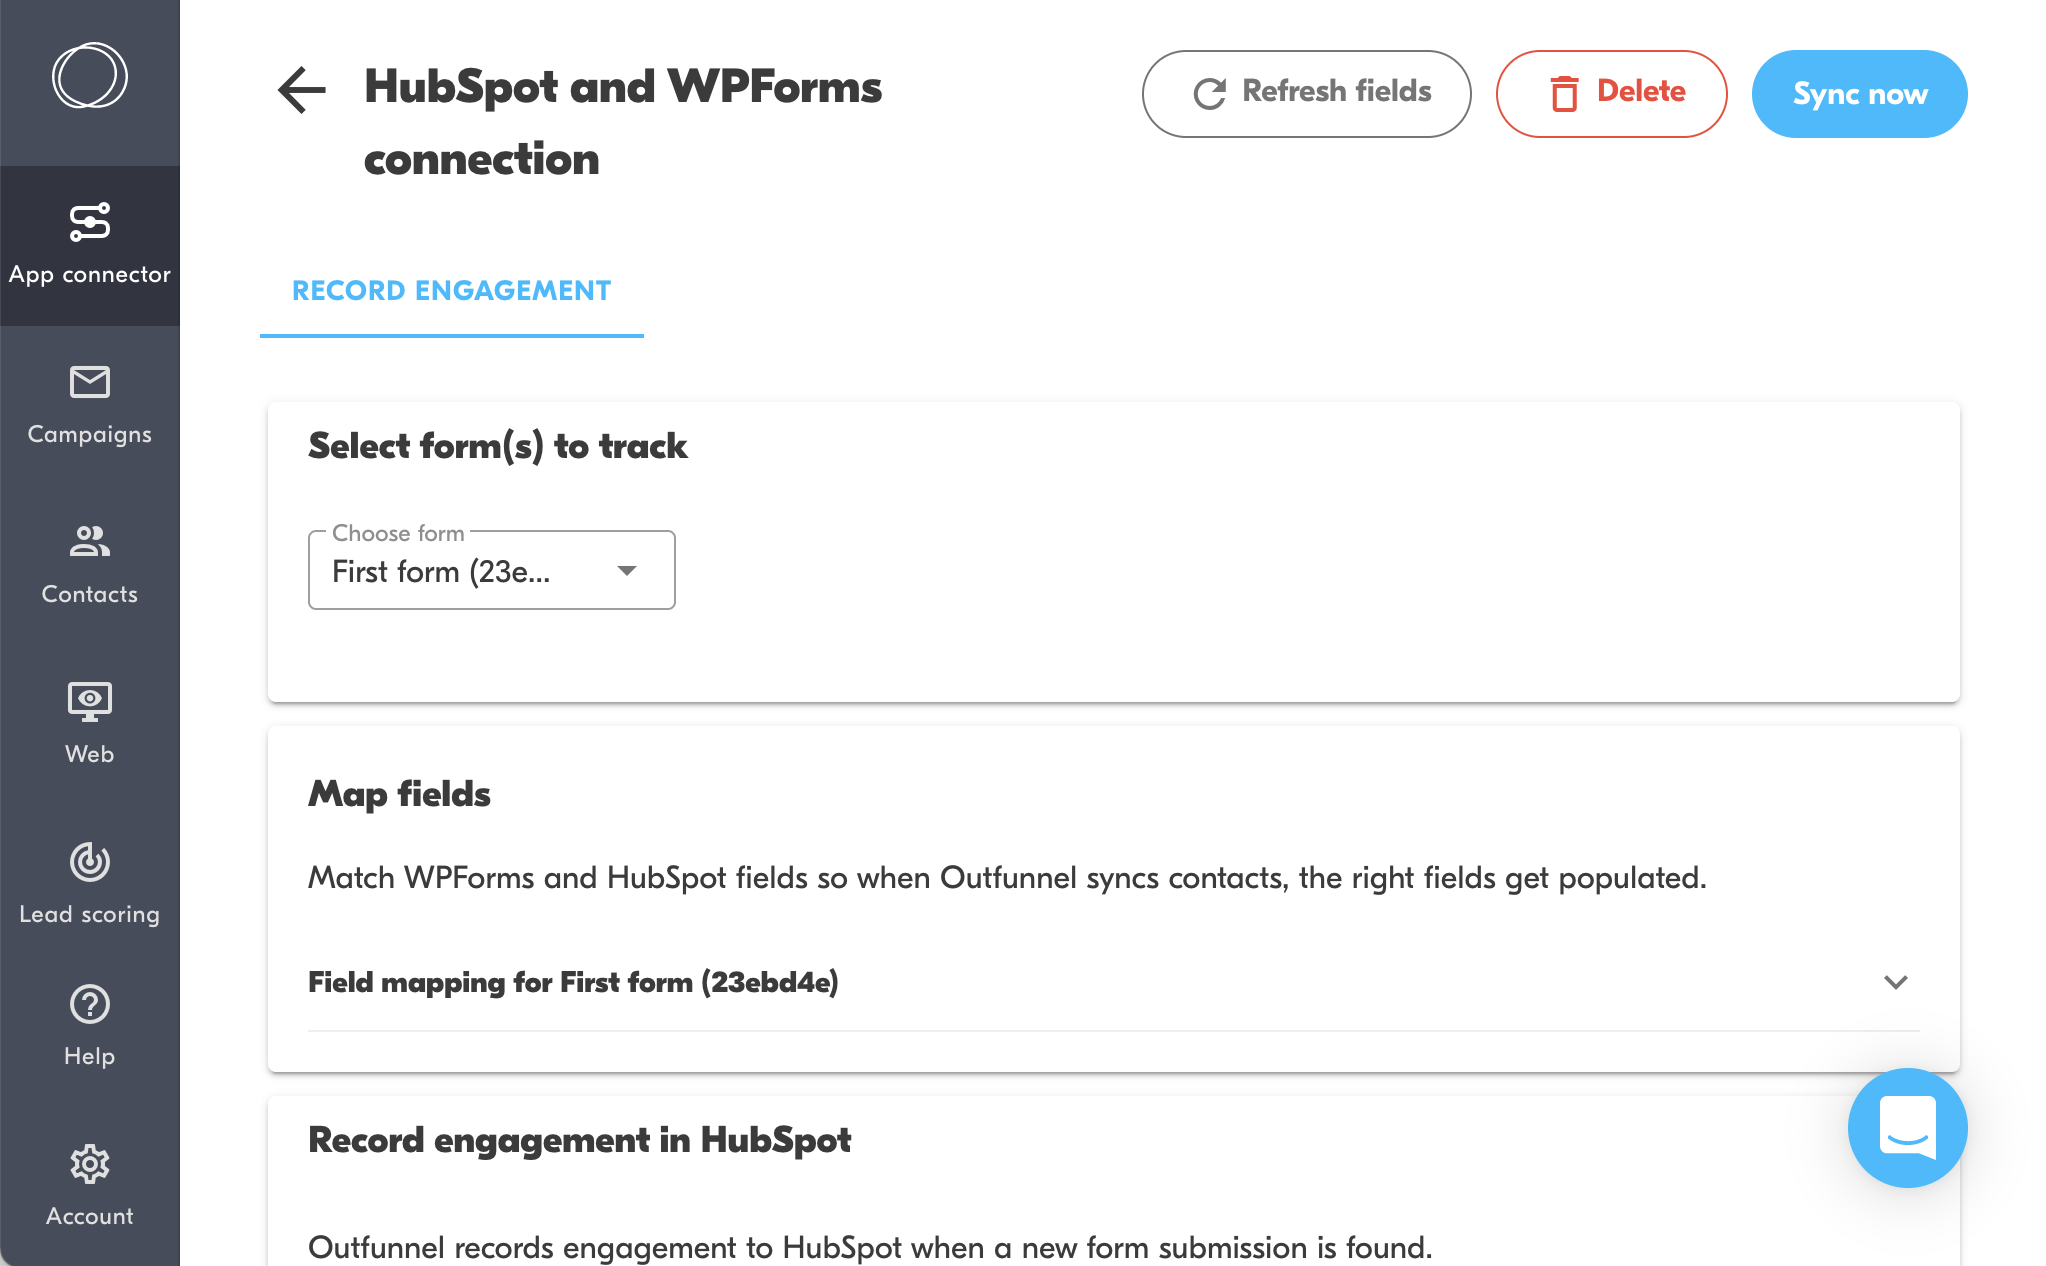 hubspot and wpforms connection